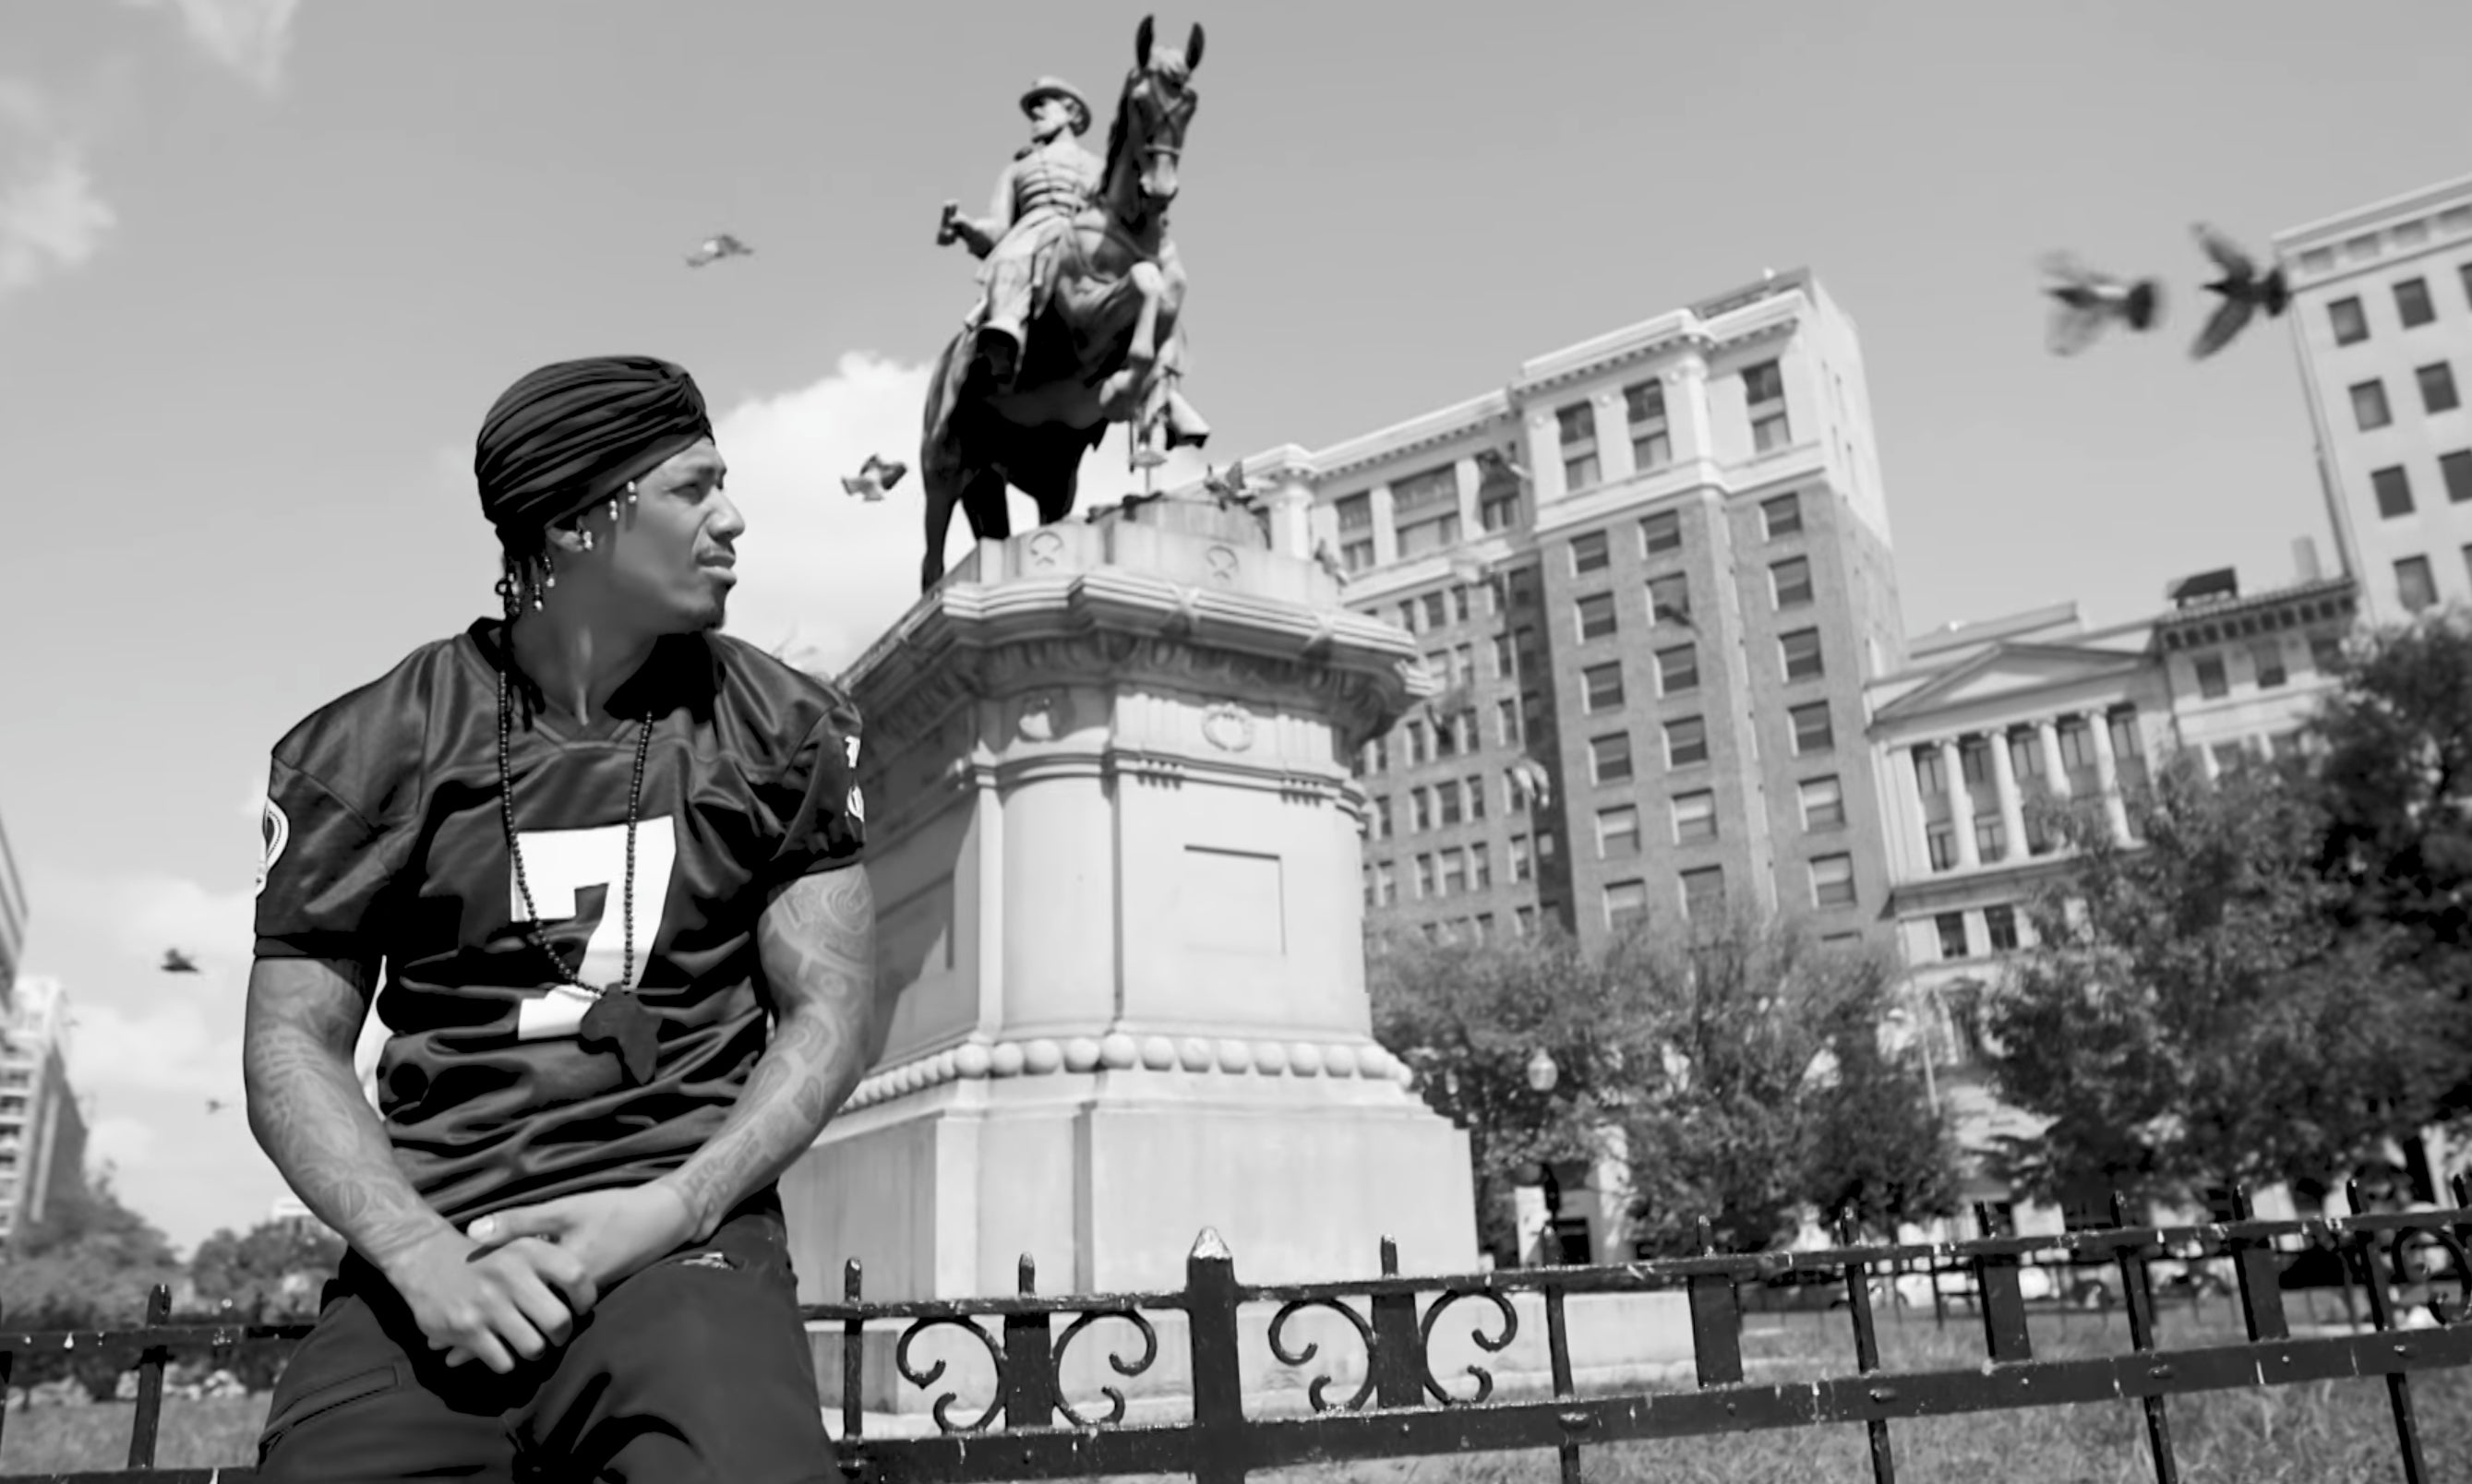 ICYMI: Nick Cannon Joins #TakeTheKnee Protest With A Chilling Video Message You Have To See
